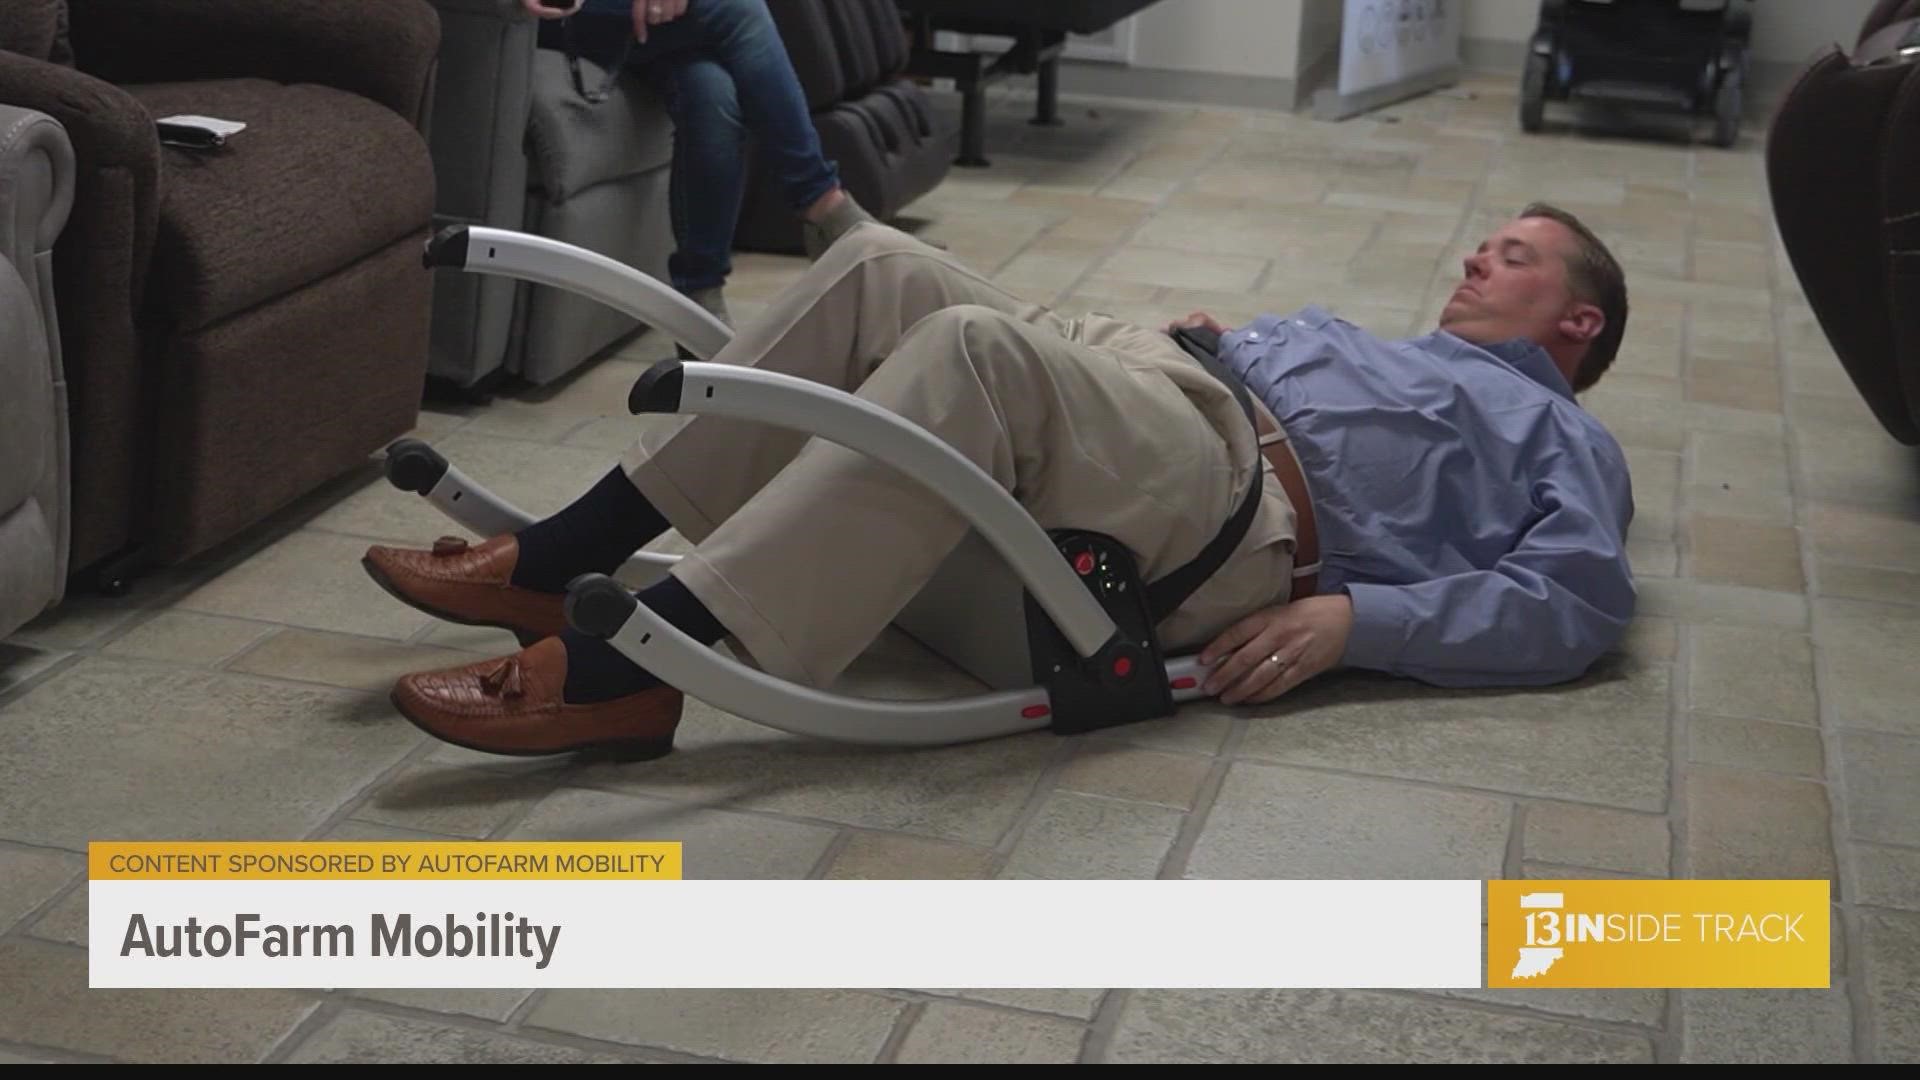 AutoFarm Mobility introduces two products that help those with neuromuscular diseases and other mobility issues that tend to fall often.